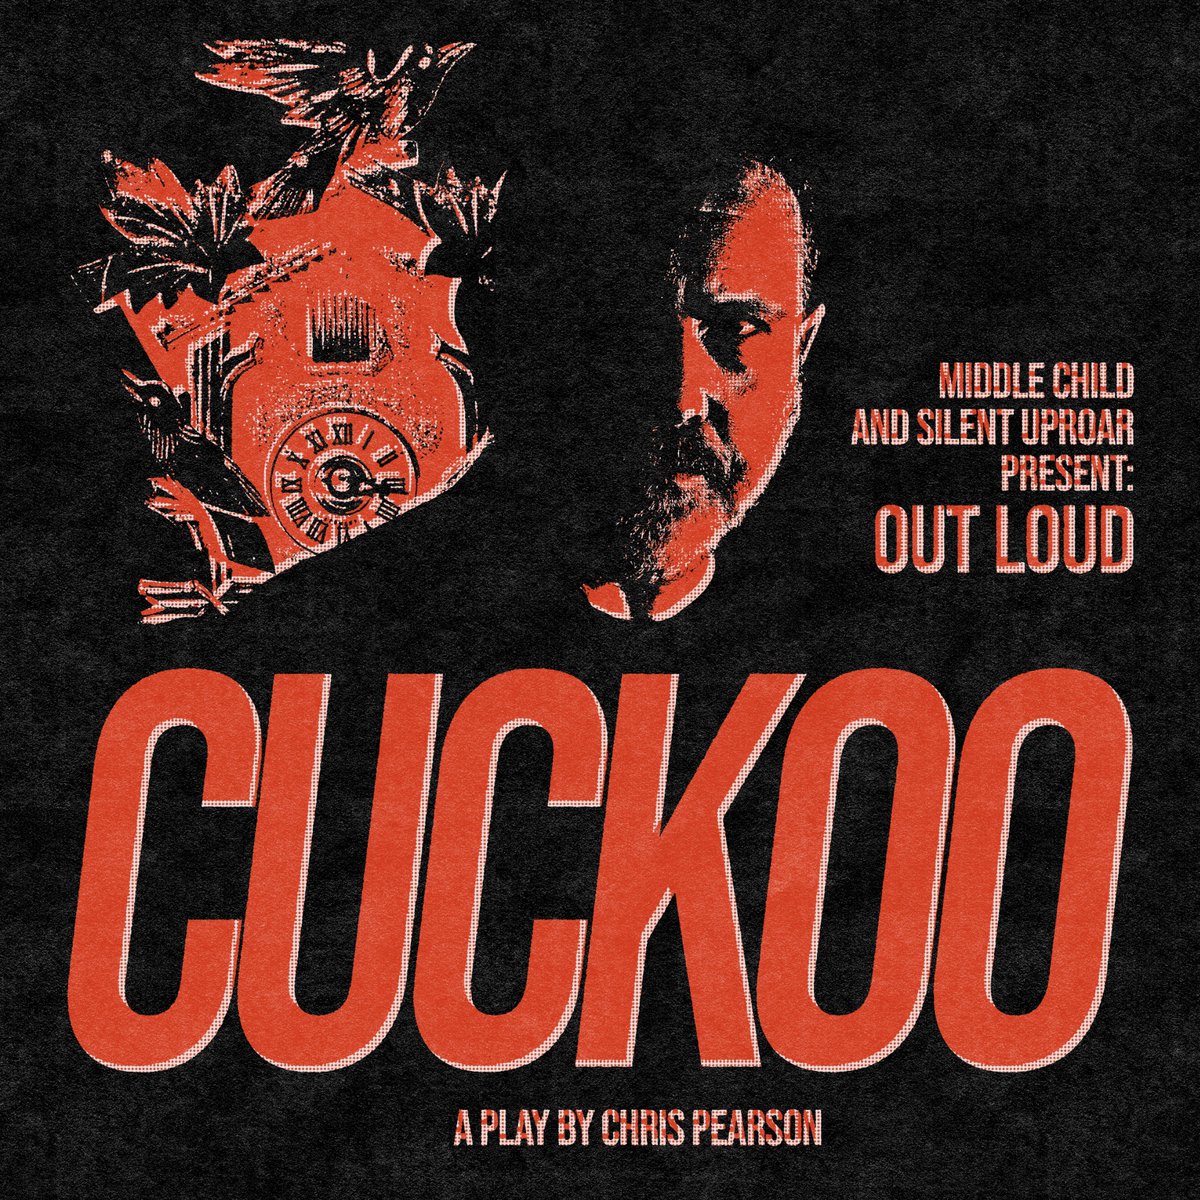 Out Loud, our scratch night with @SilentUproarPro, is back in Hull from 20-21 Oct, with Cuckoo by Chris Pearson. Pay what you decide tickets are now on-sale! bit.ly/3PDLvAJ